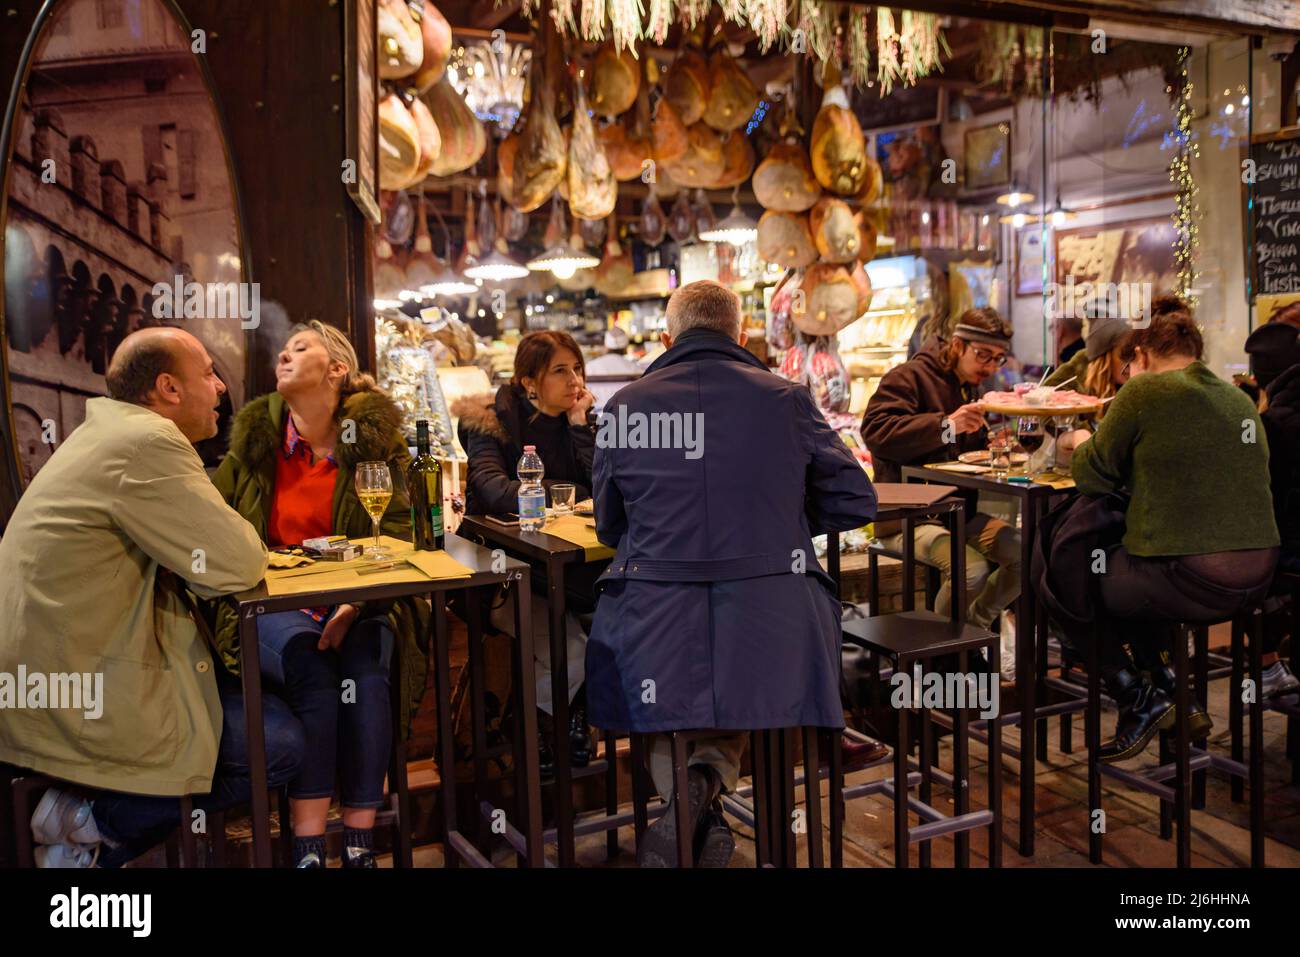 People eating and drinking on the street in Bologna, Italy Stock Photo